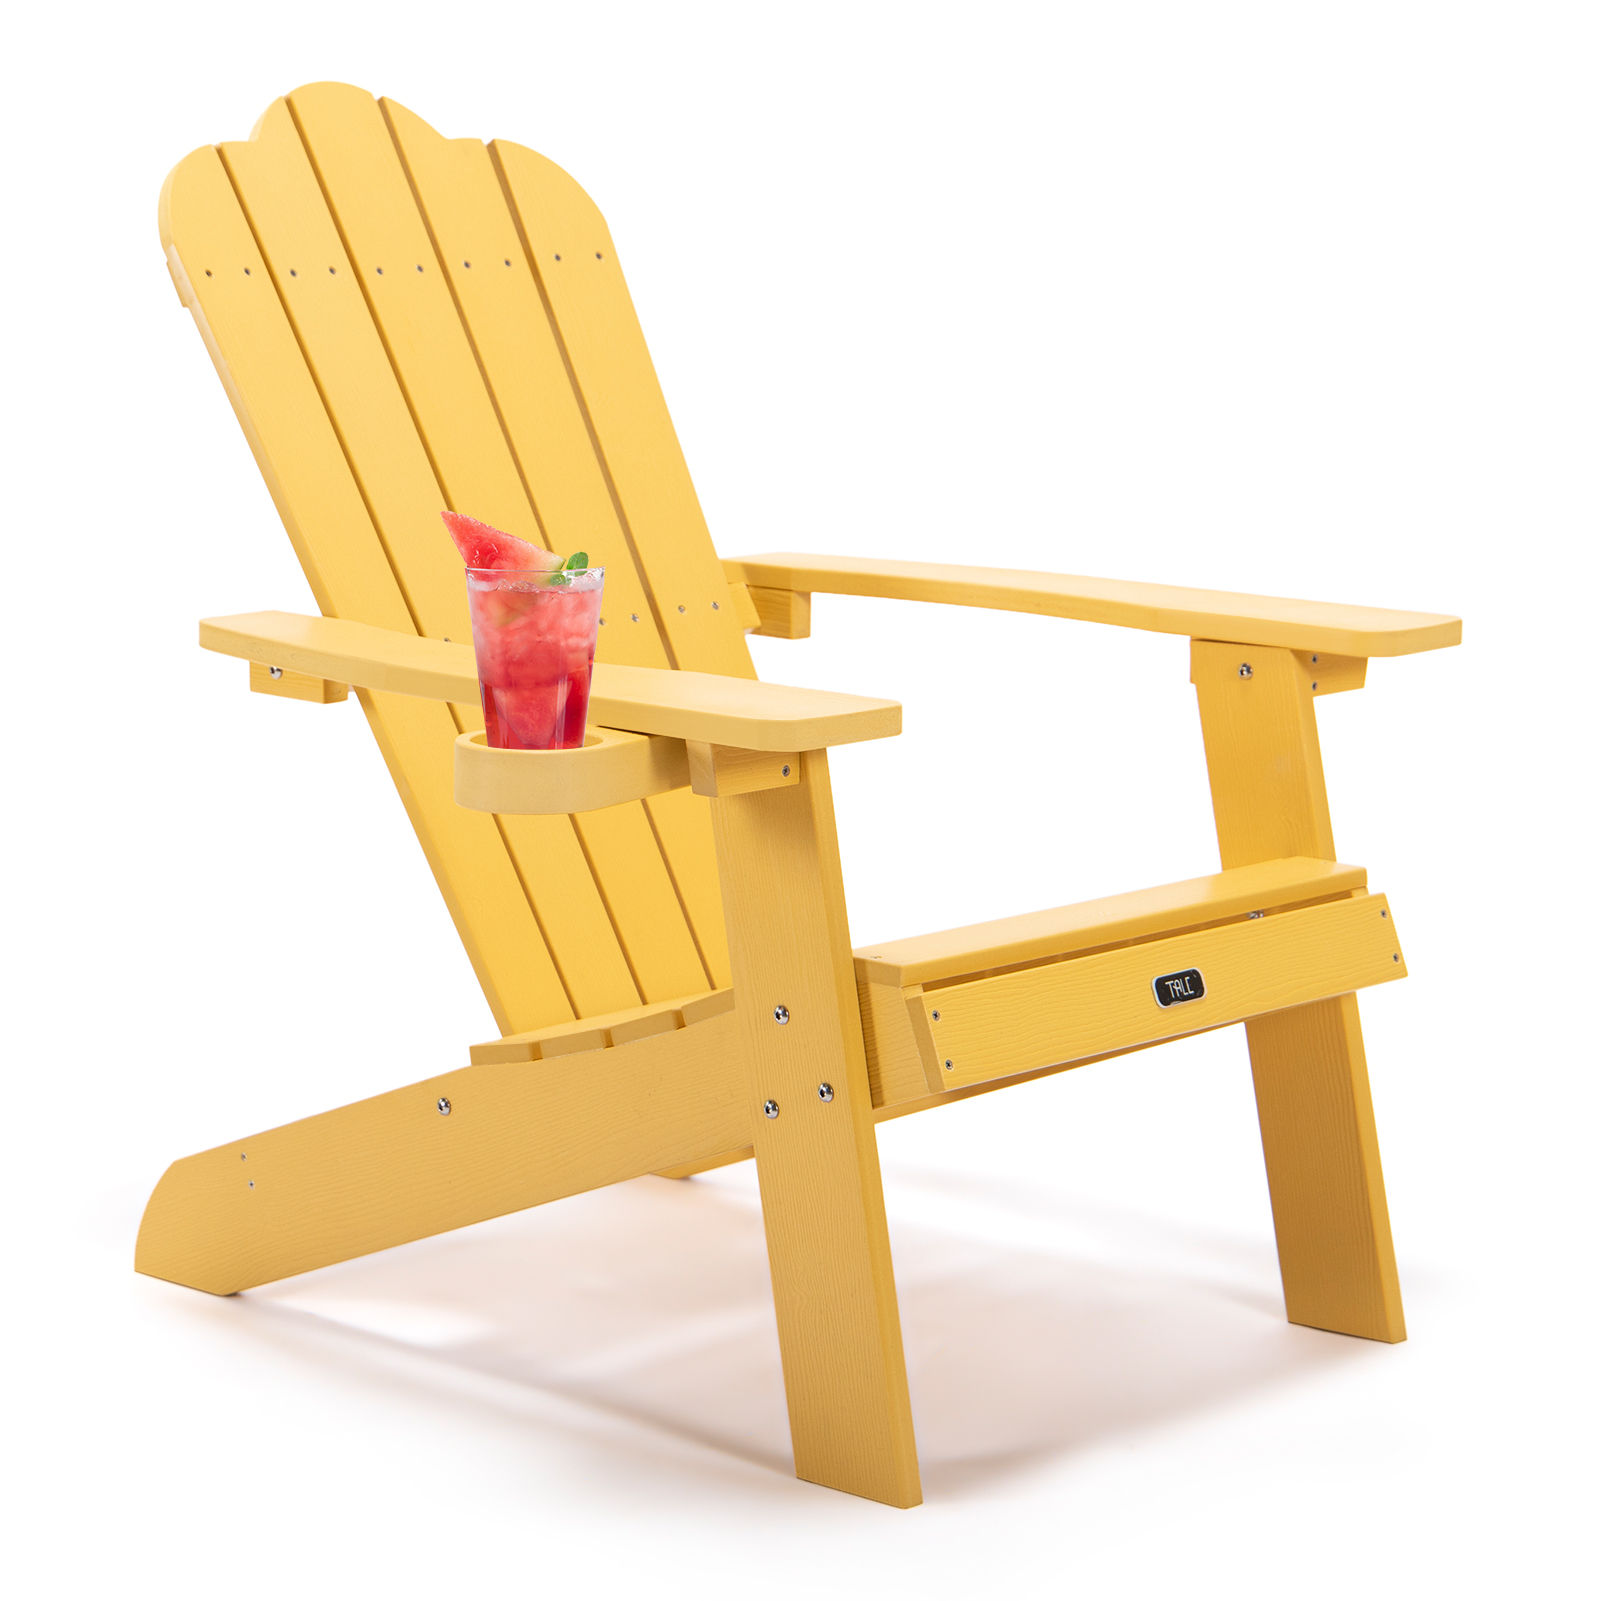 Adirondack Chair with Cup Holder, Patio Outdoor Chairs, Weather Resistant Lounge Chair, Fade-Resistant, Backyard Furniture Painted Chair, for Lawn Outdoor Patio Deck Garden Porch Lawn - image 1 of 7